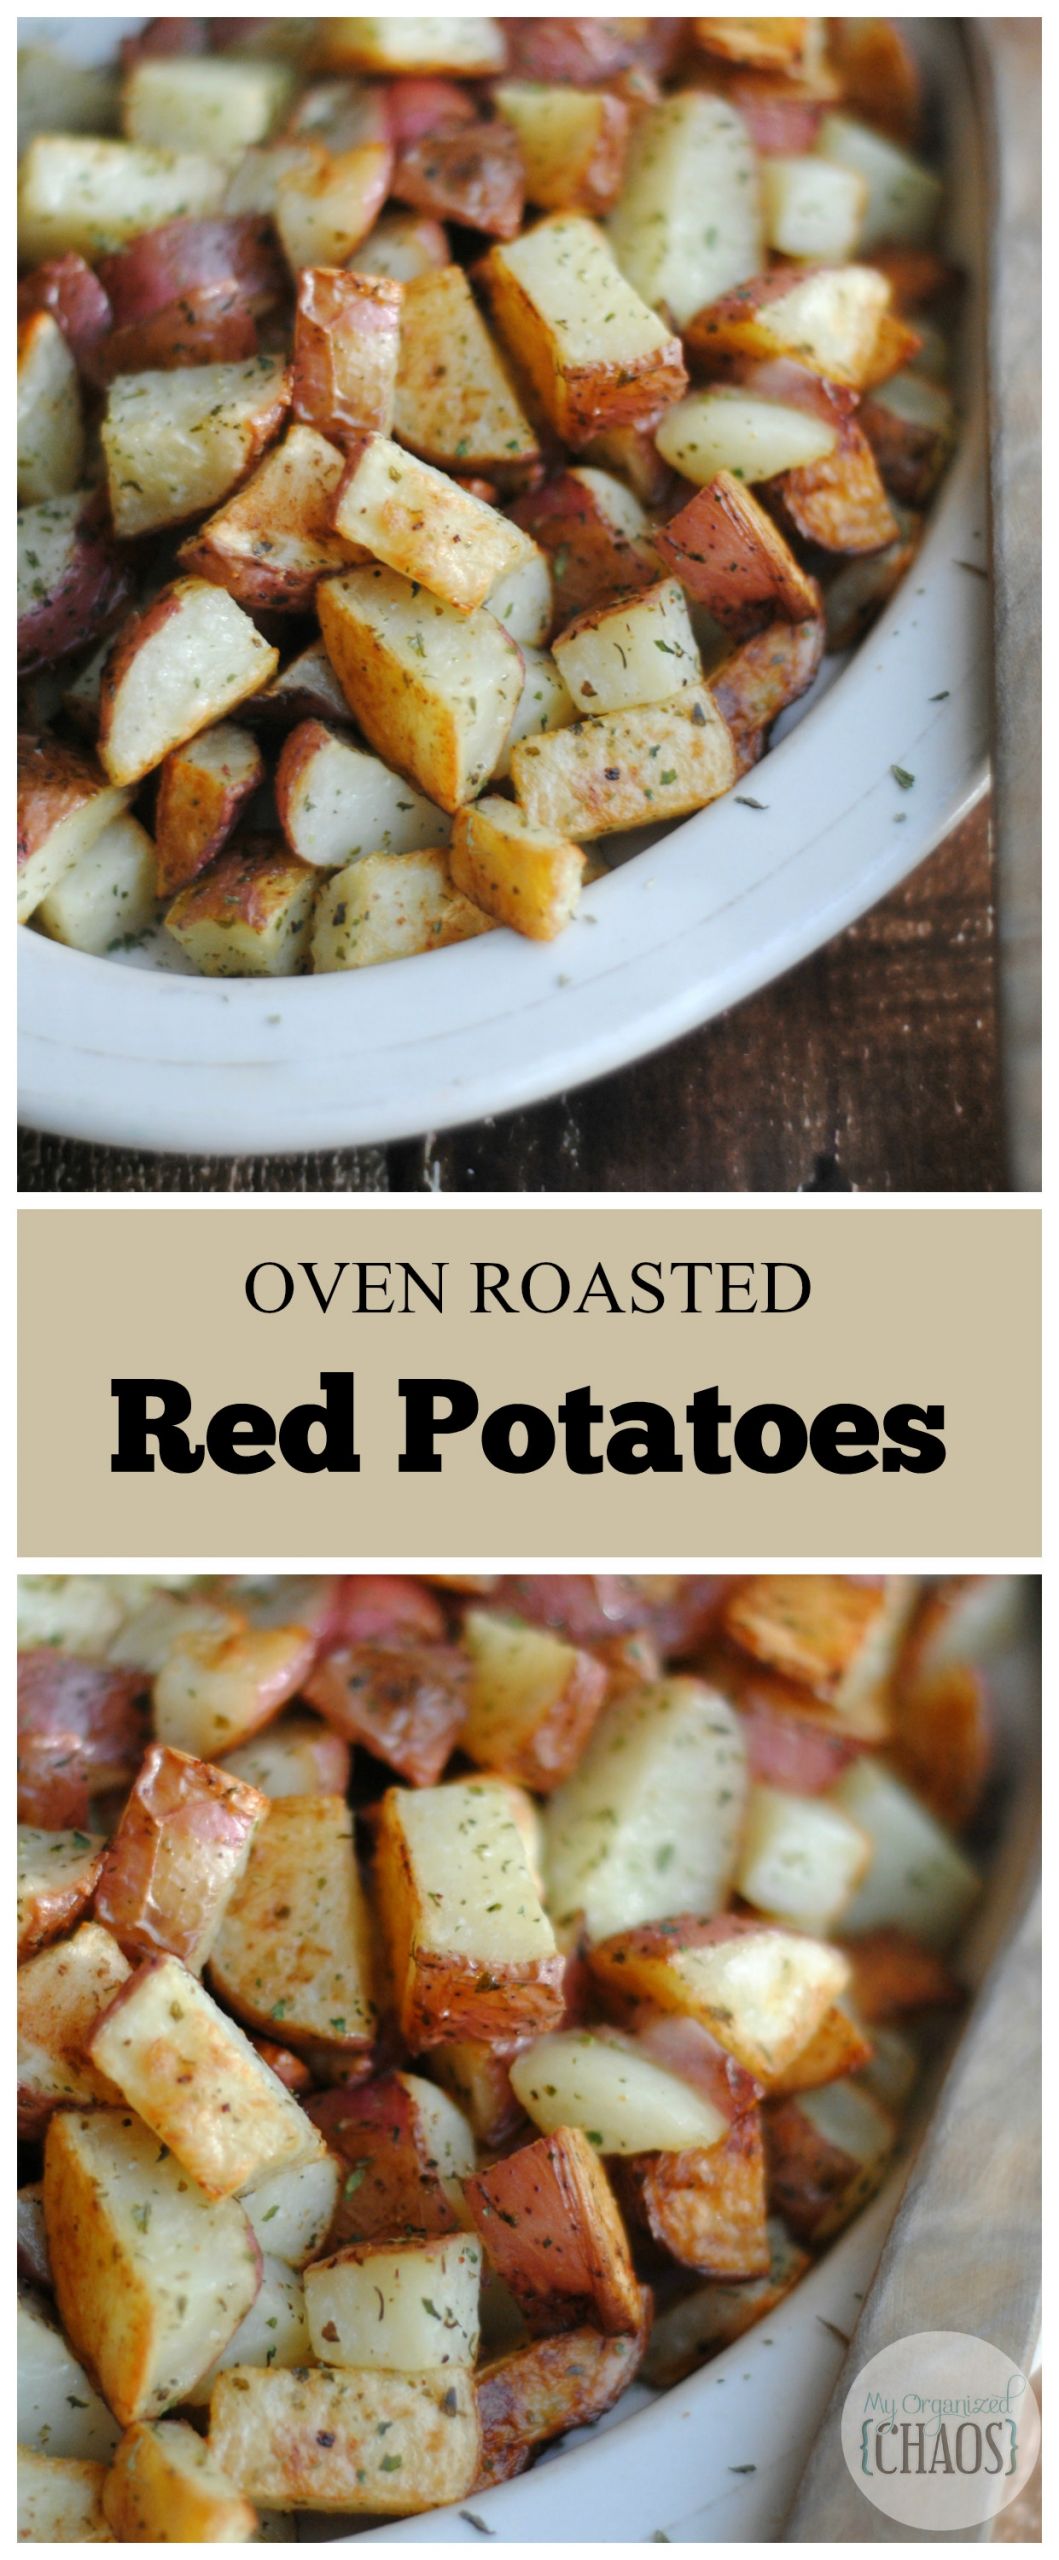 Oven Roasted Red Potatoes
 Oven Roasted Red Potatoes